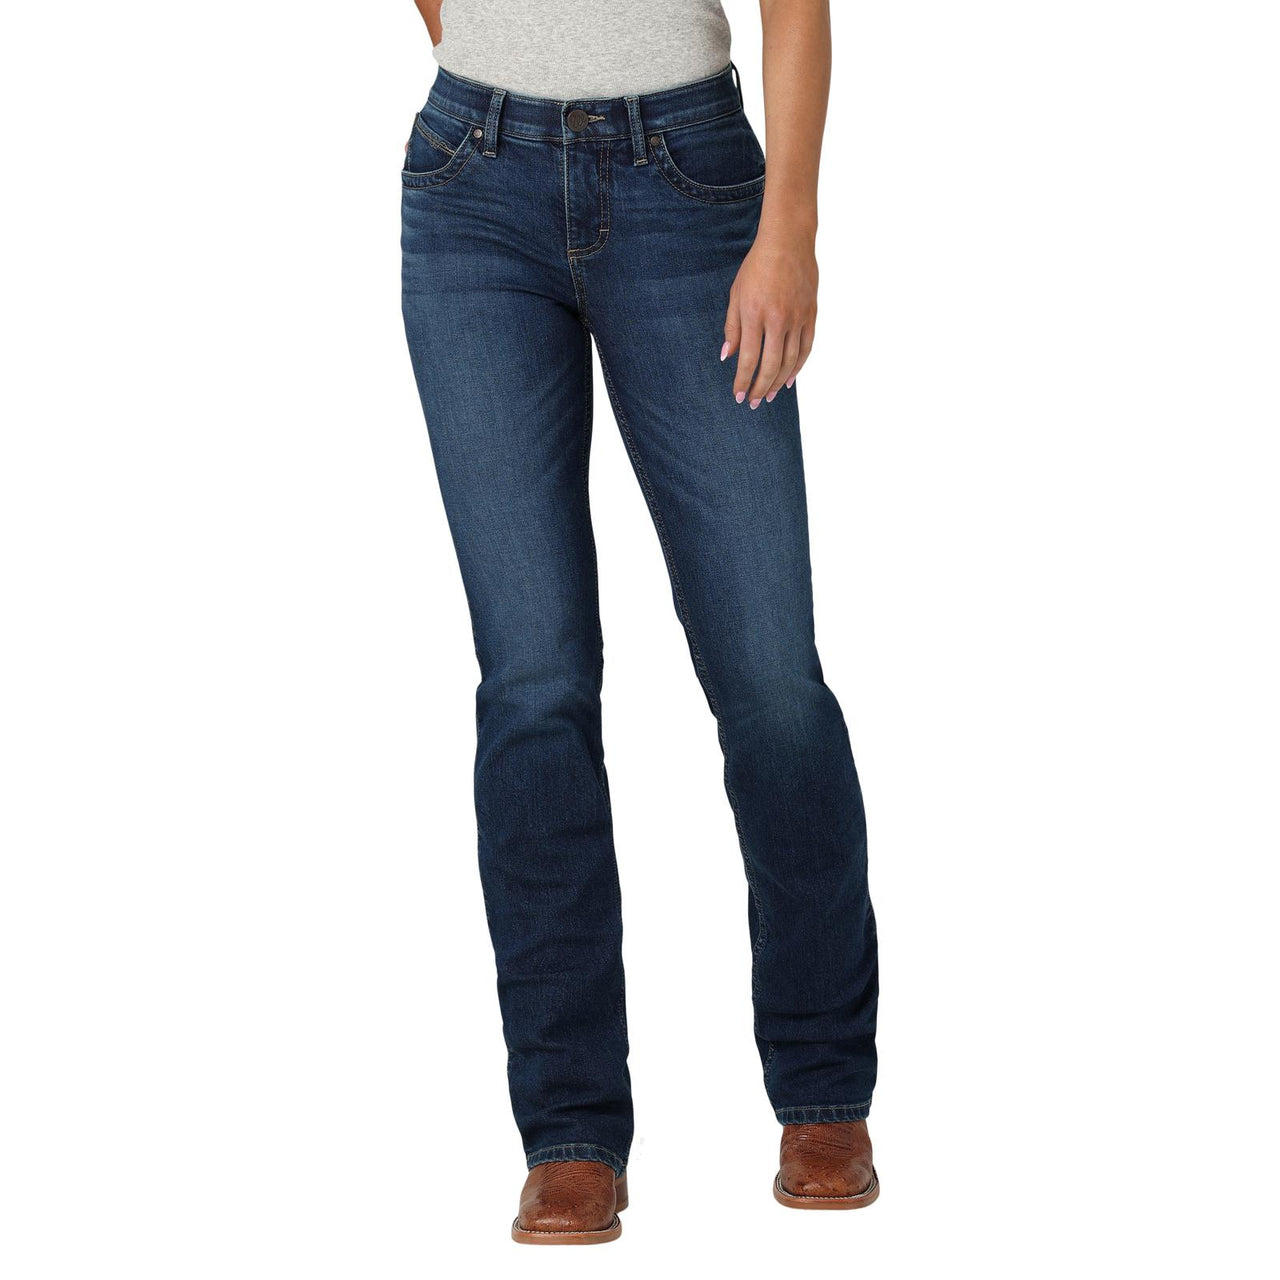 Wrangler Women's Q-Baby Briley Mid Rise Boot Cut Ultimate Riding Jean